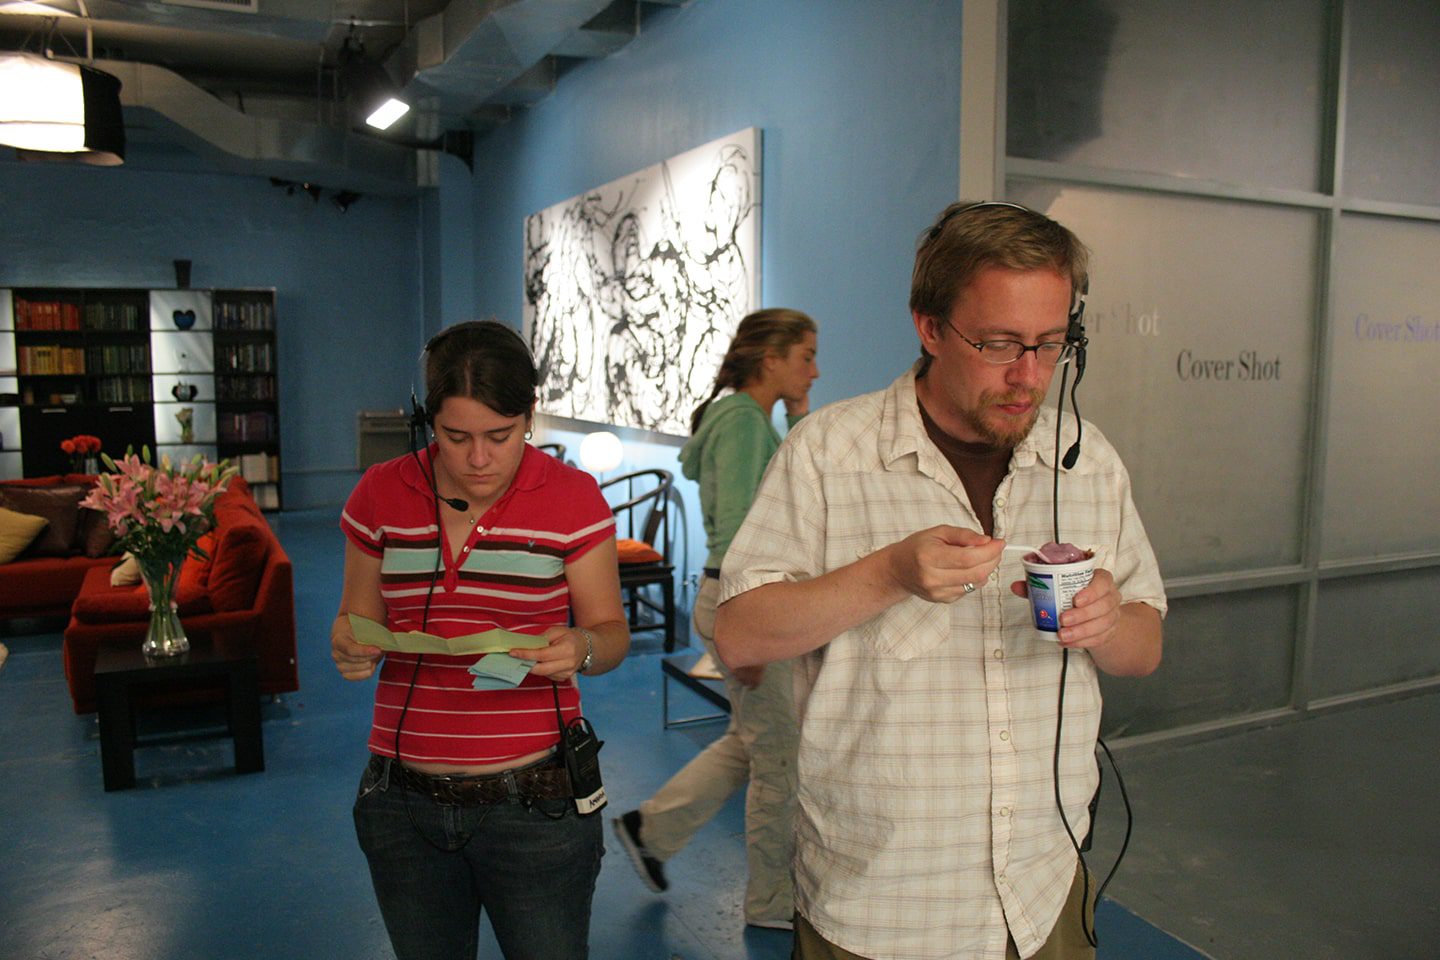 Two people standing in a room with headphones on.